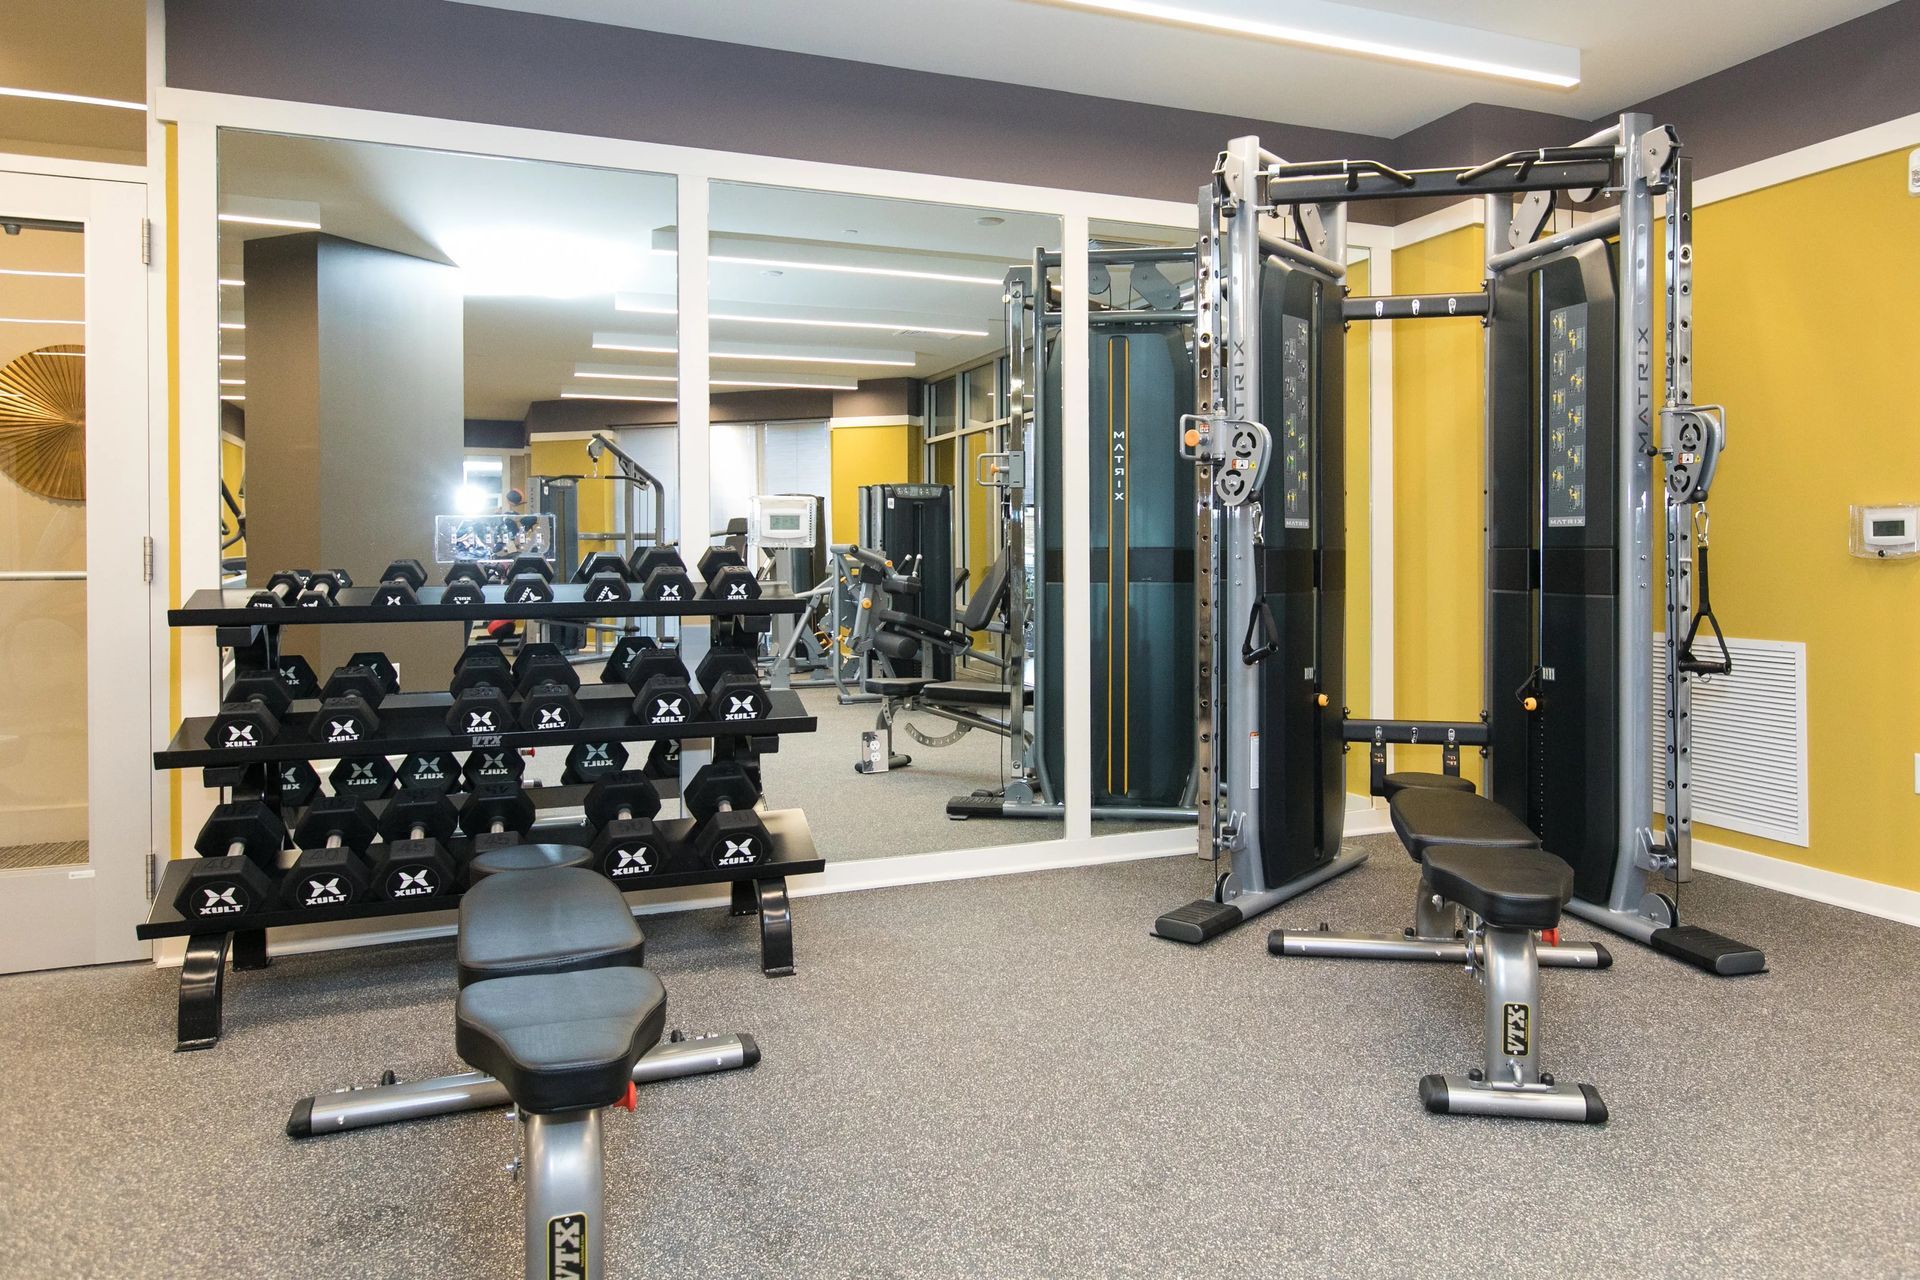 Fitness center at Verde at Howard Square.